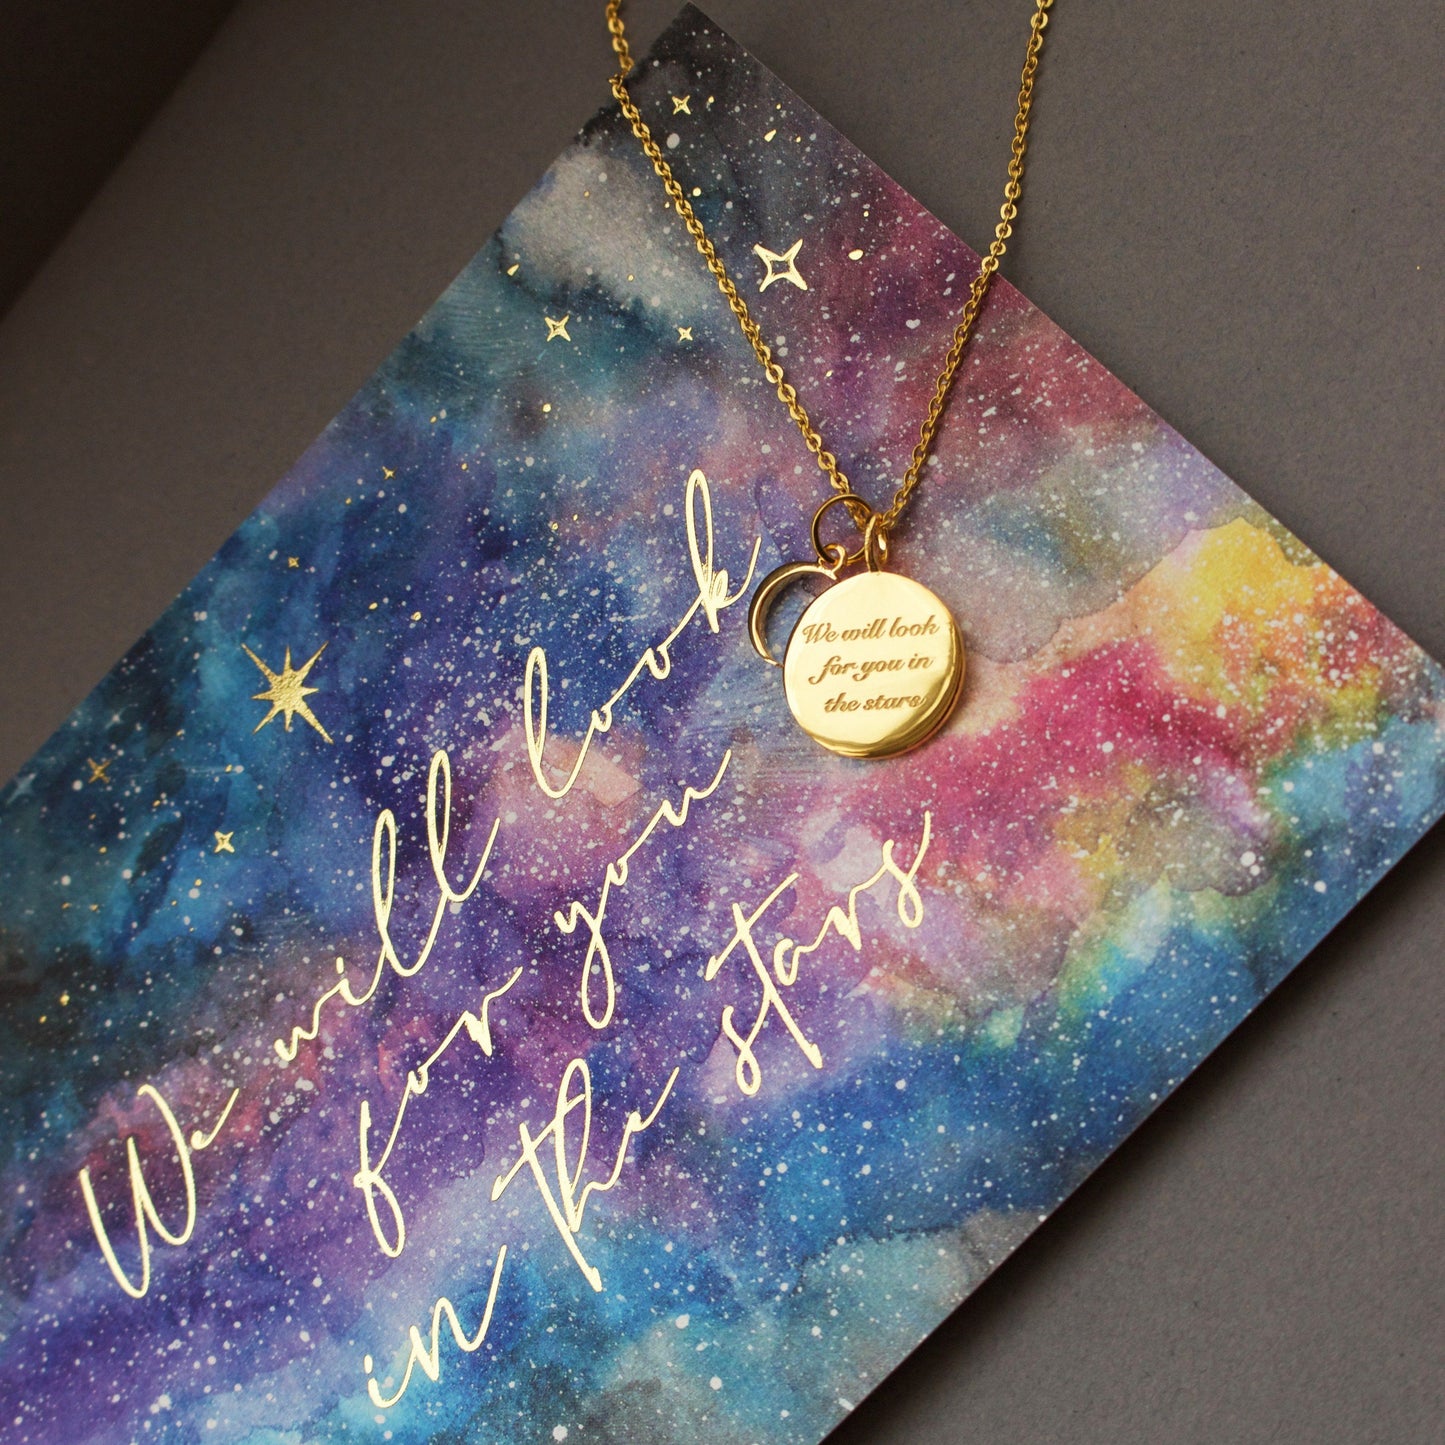 14k Gold Plated "We will look for you in the stars" Coin Necklace with Crescent Moon Charm Necklace Pink City 